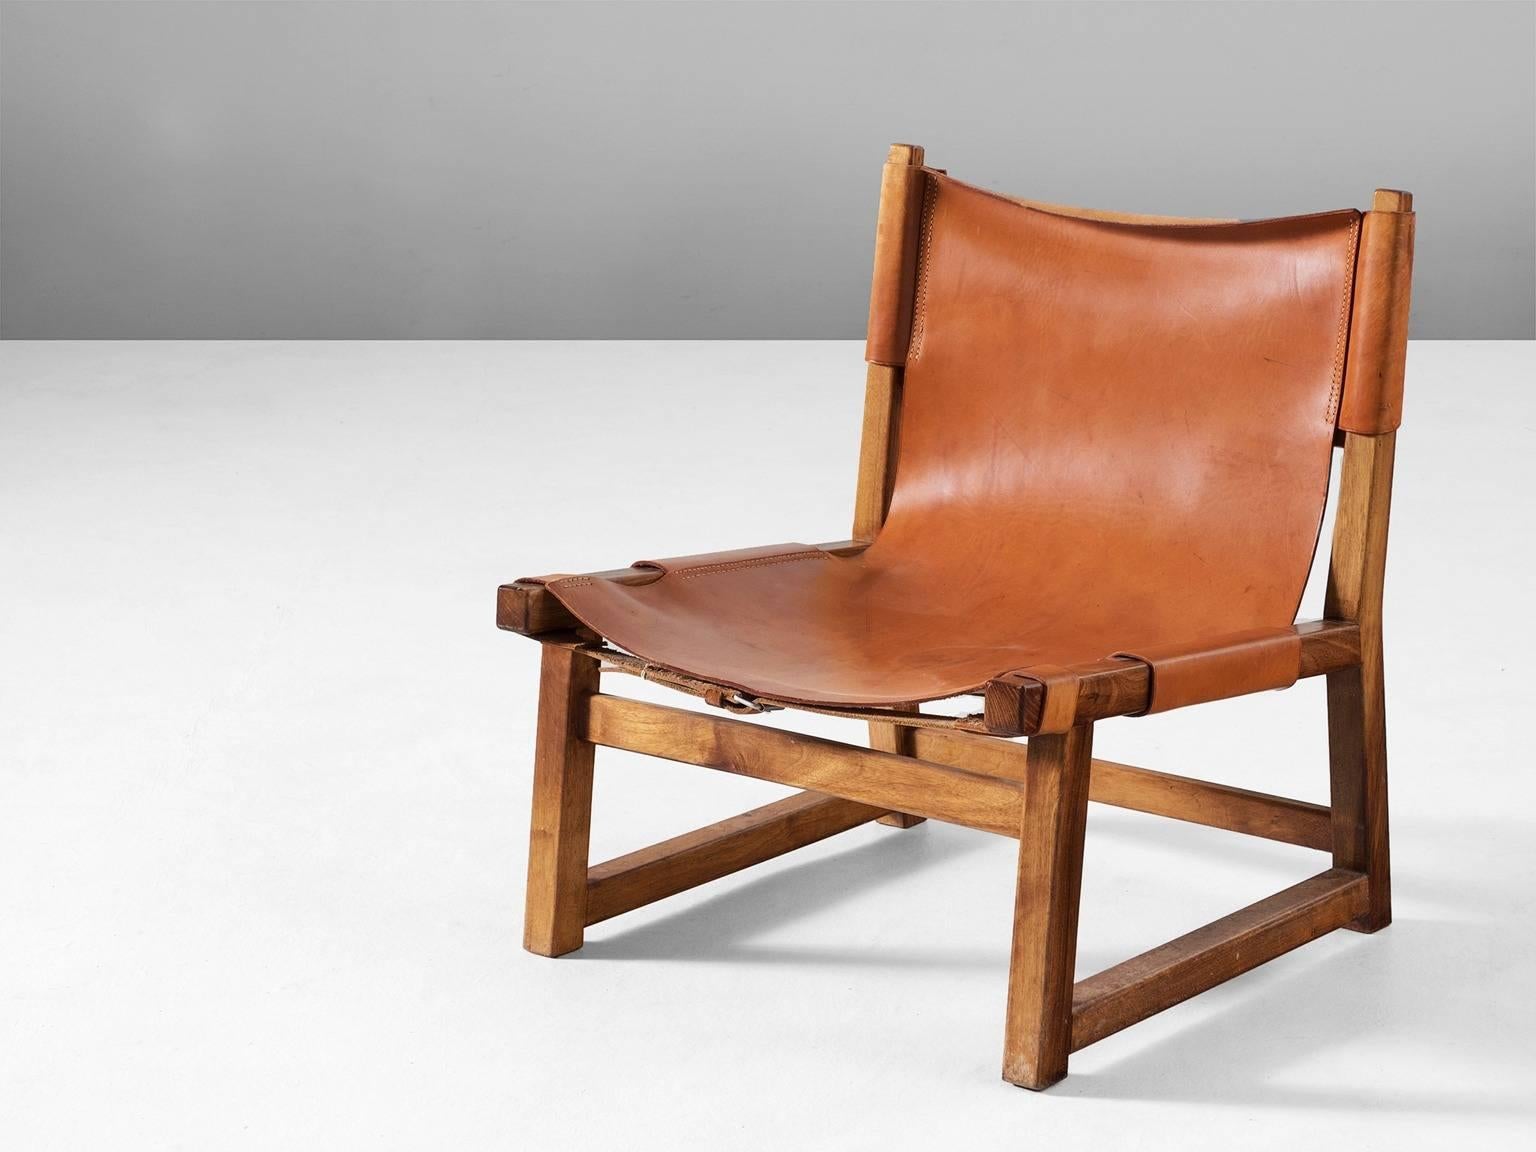 Hunting chair, wood and leather, Scandinavia, 1950s. 

Sturdy chair with a frame of solid oak. The seating is from cognac colored saddle leather with nice contrasting stitching. The natural leather shows a beautiful patina which gives this chair